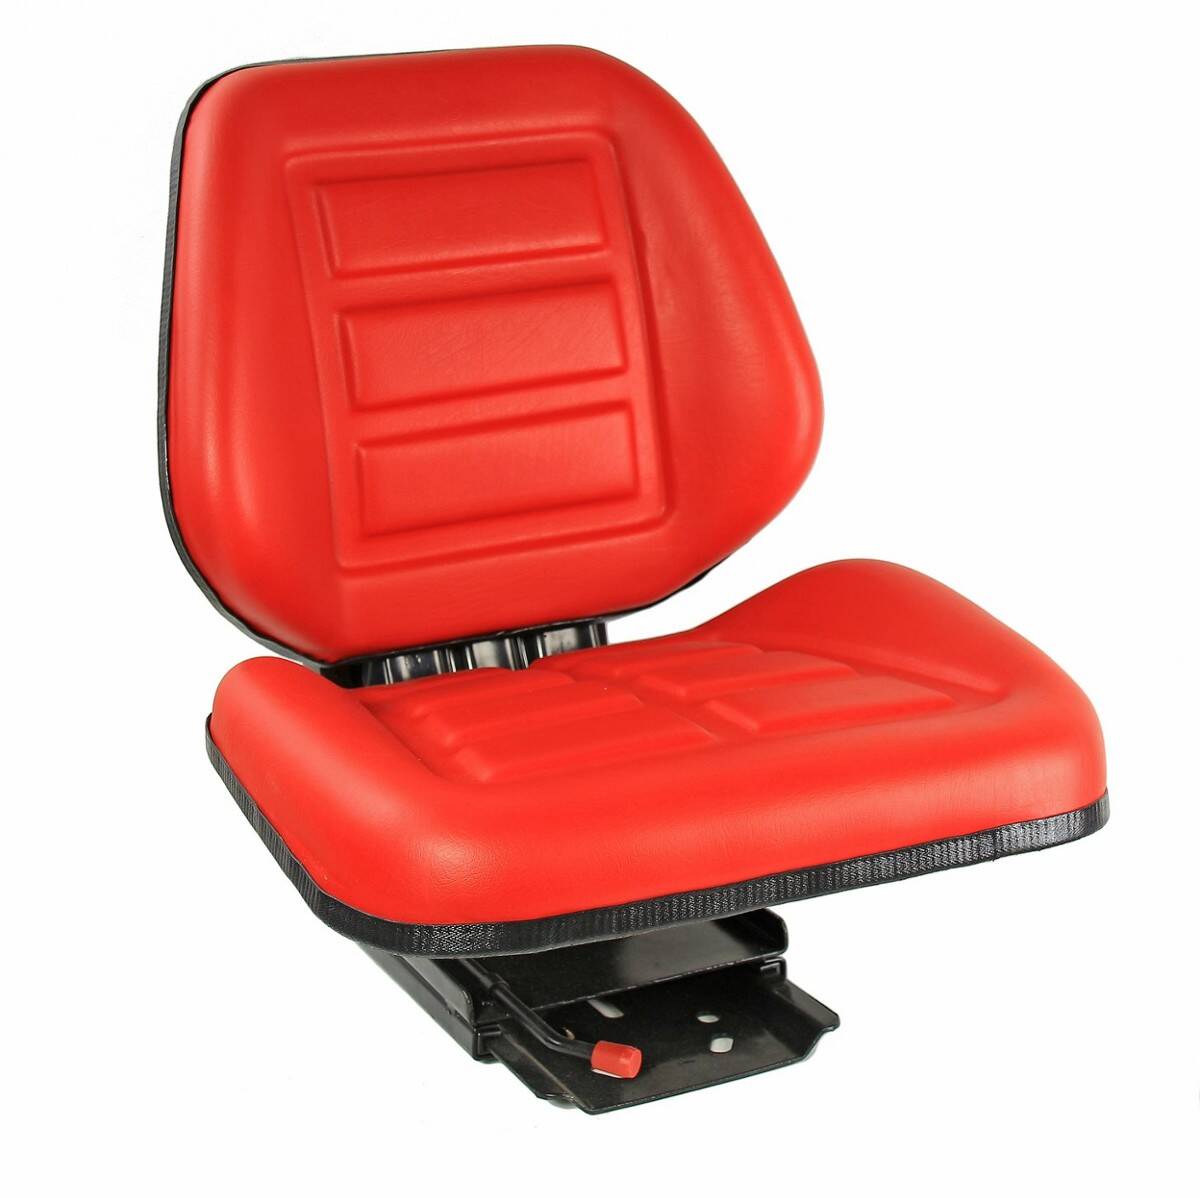 TRACTOR SEAT GBS4126 RED  colour for  MASSEY FERGUSON, .....